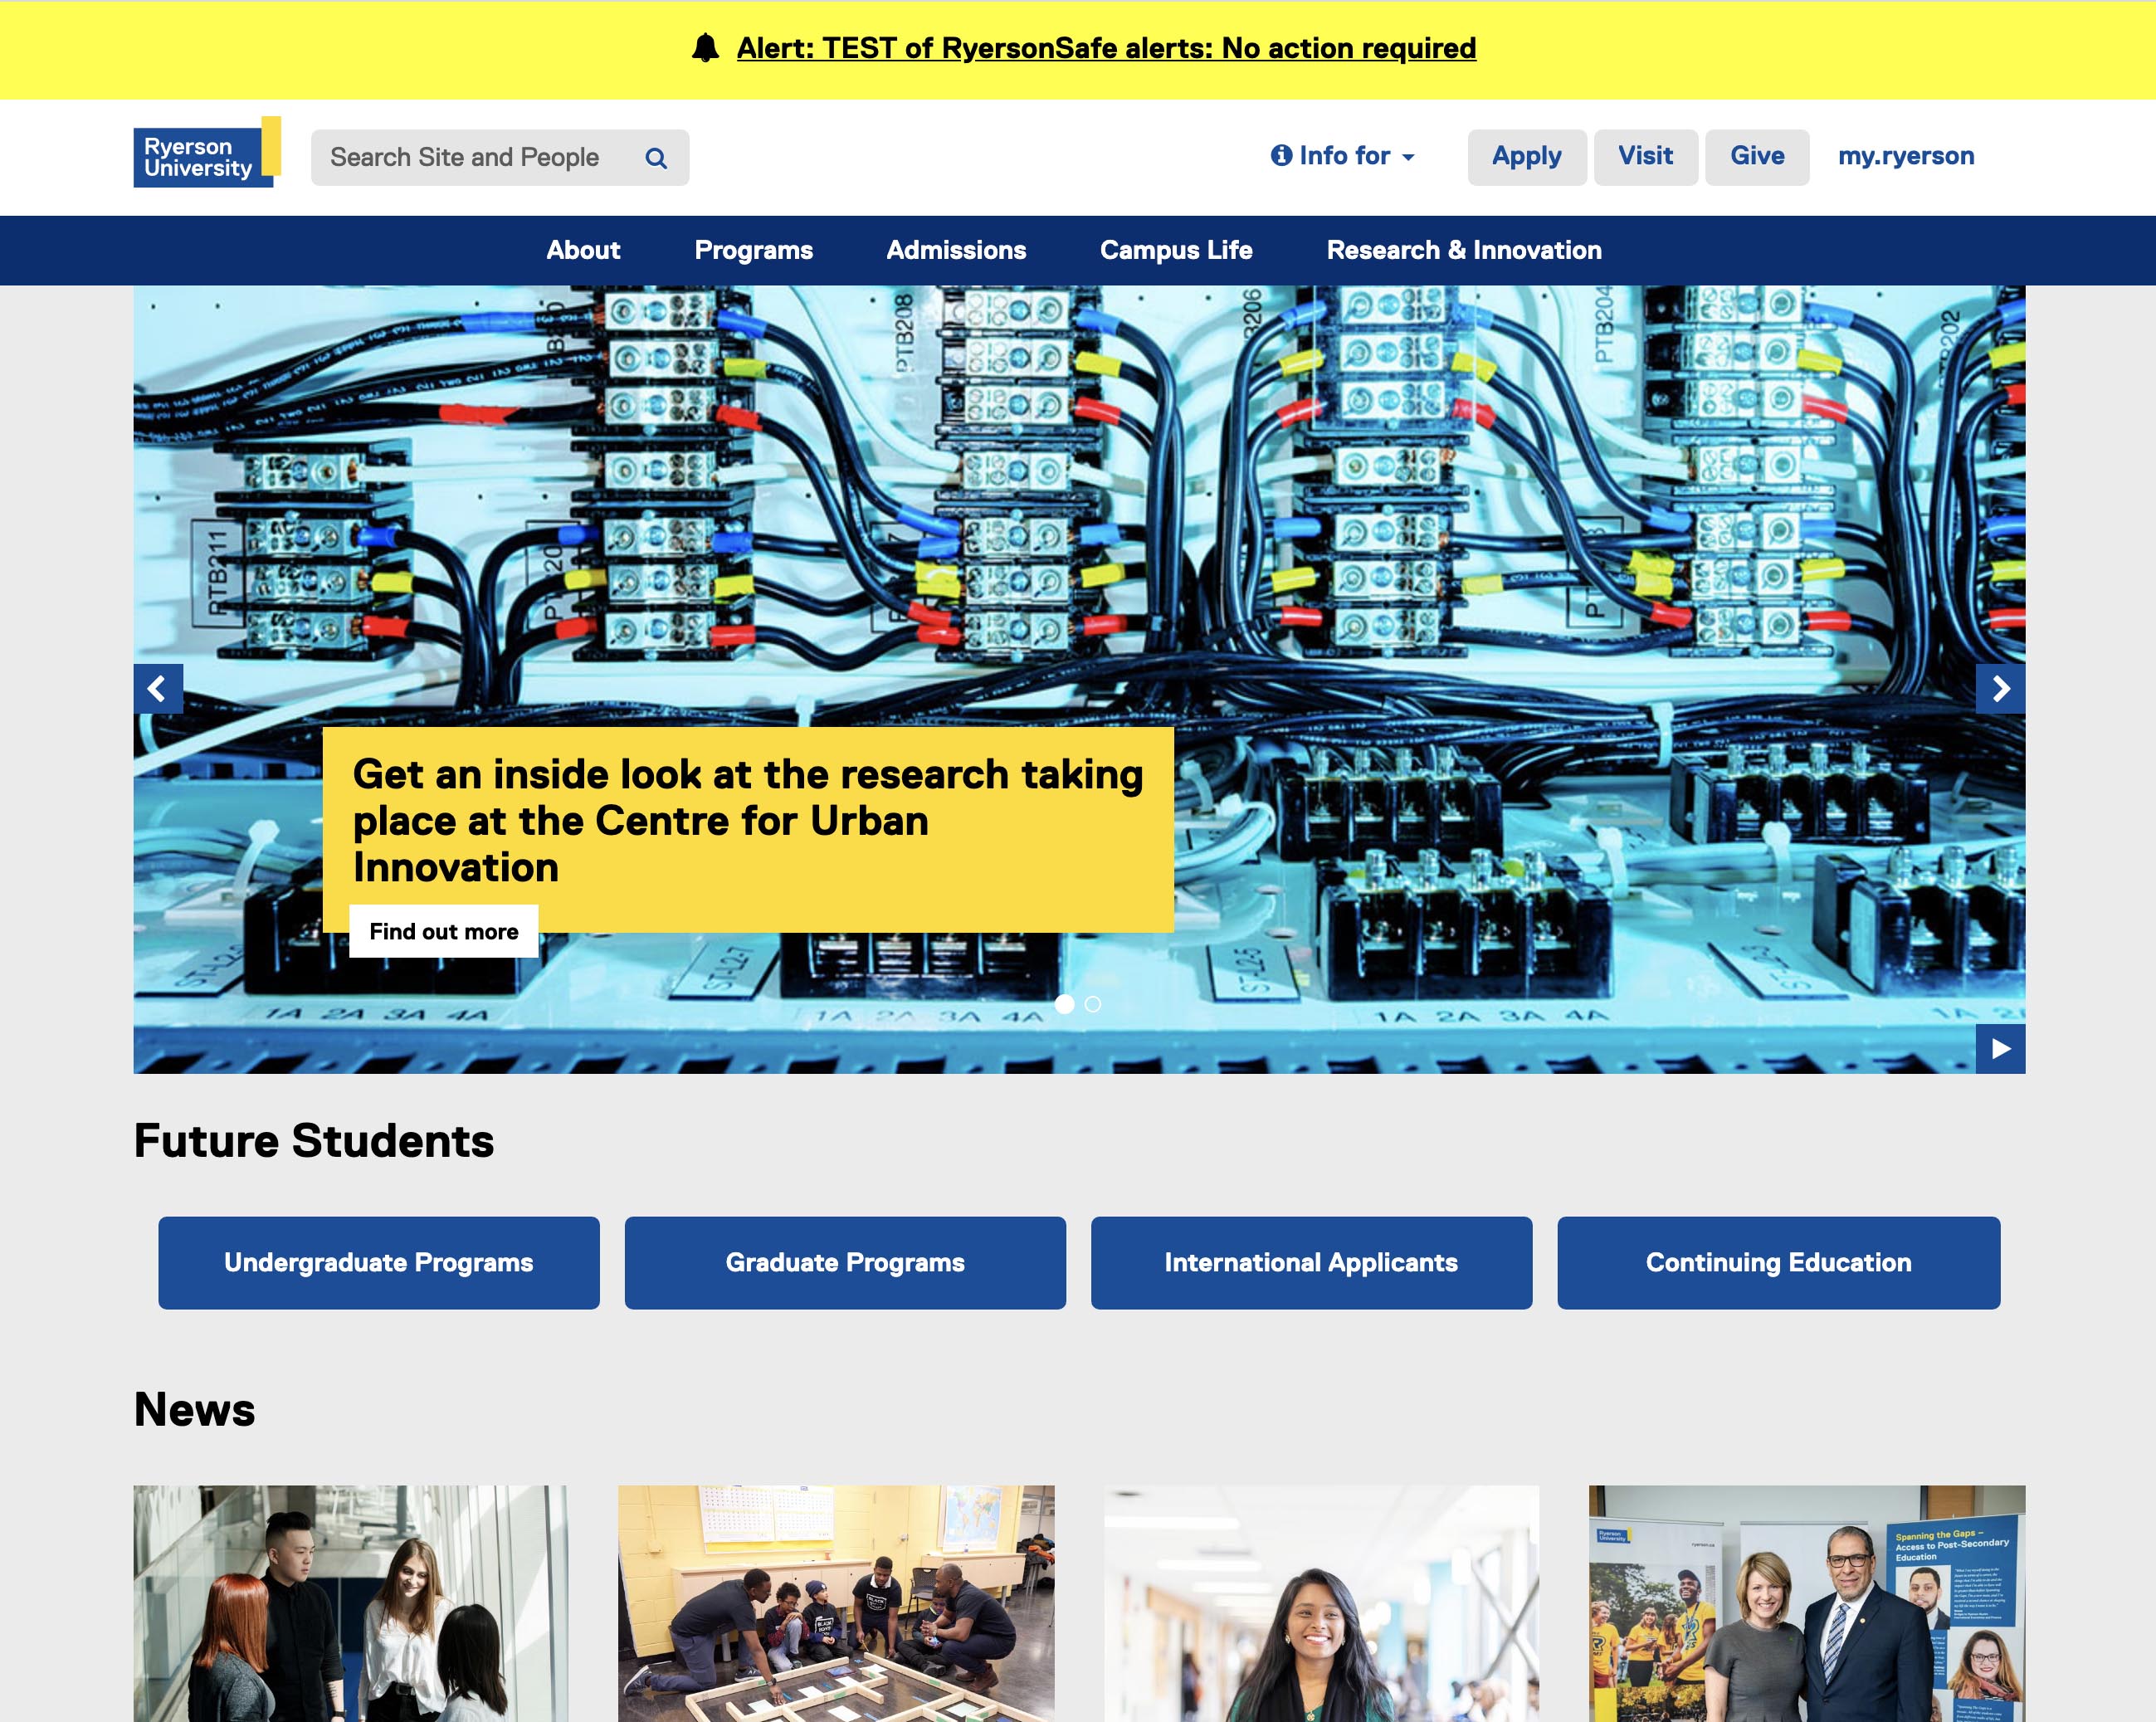 The Ryerson website homepage with a yellow alert bar at the top of the page.